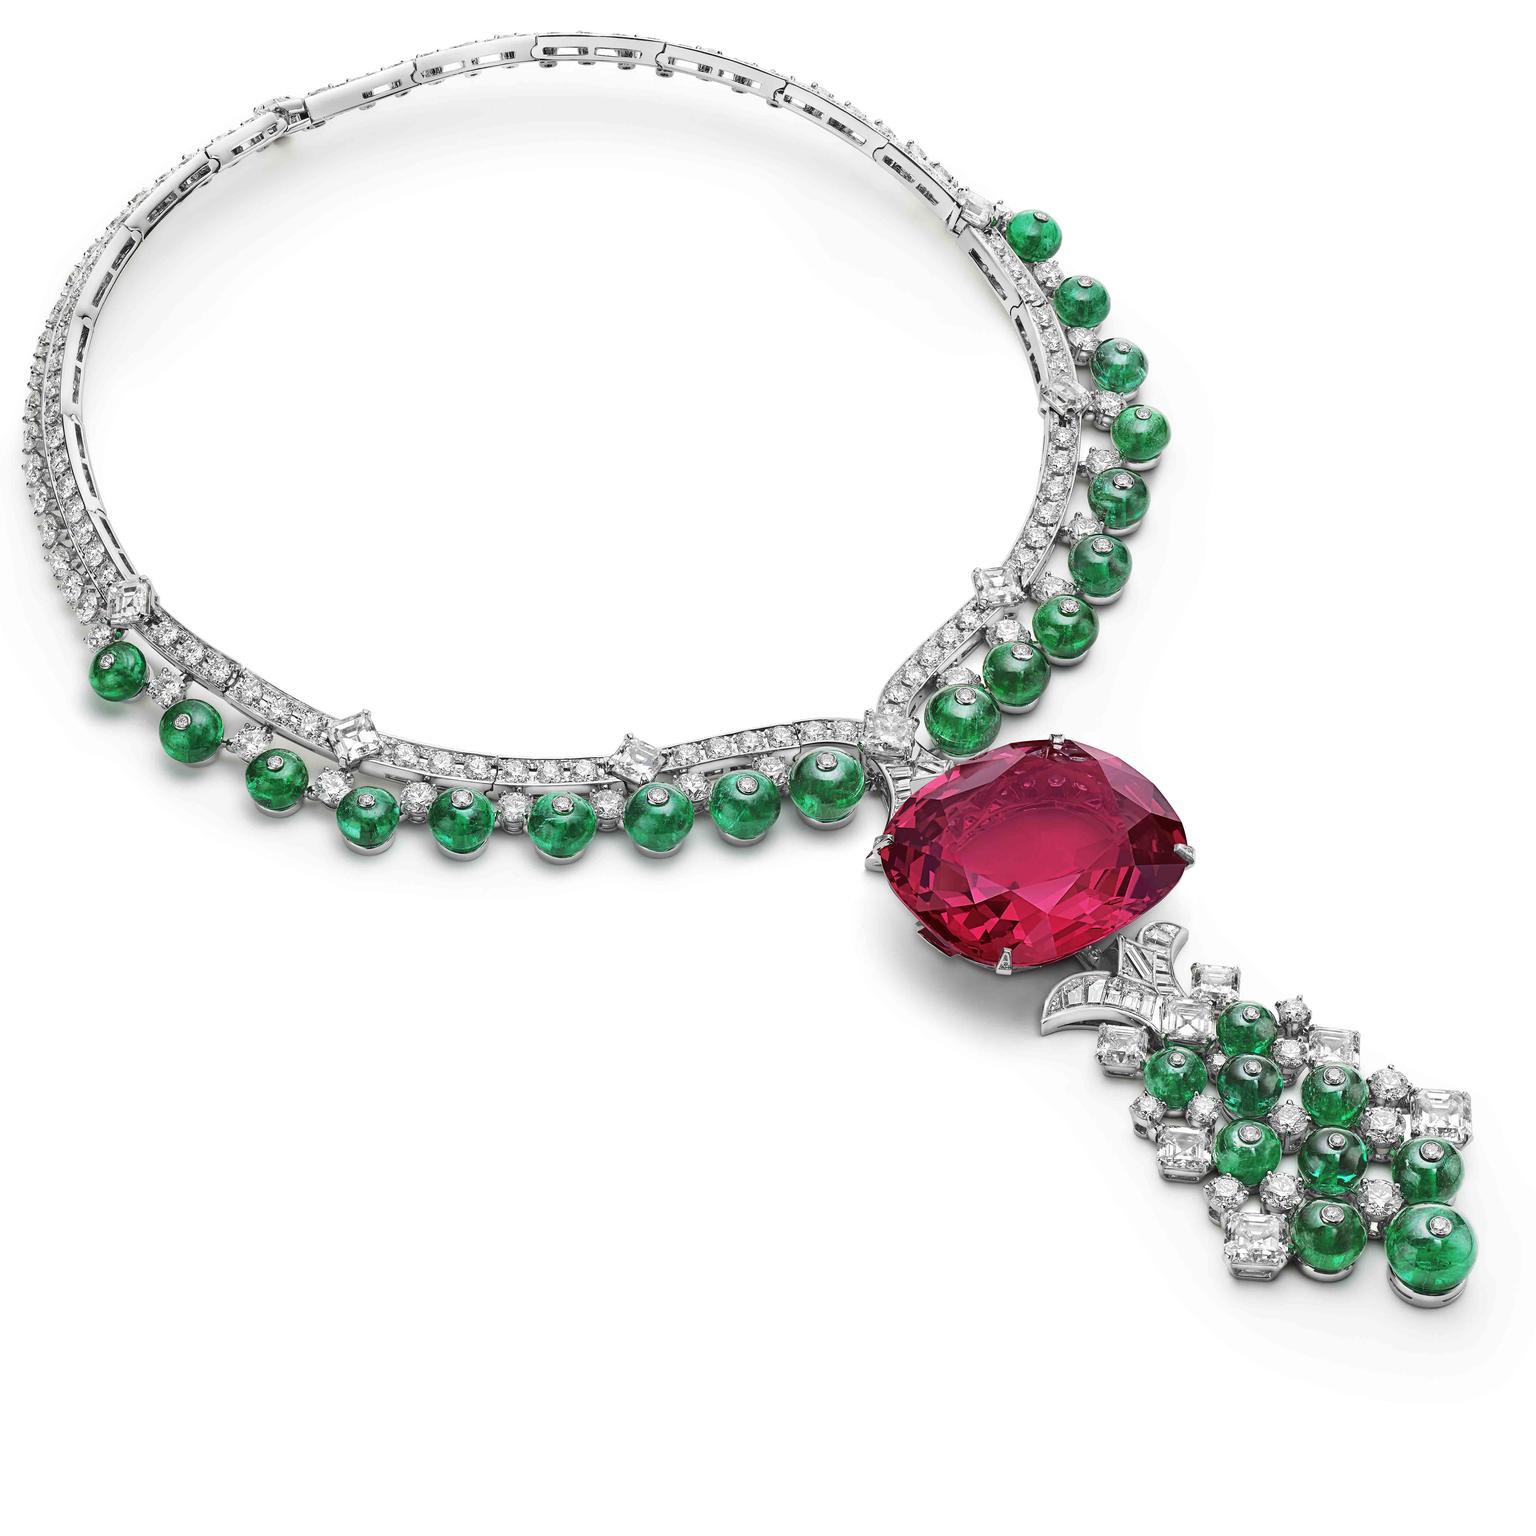 Imperial Spinel necklace by Bulgari